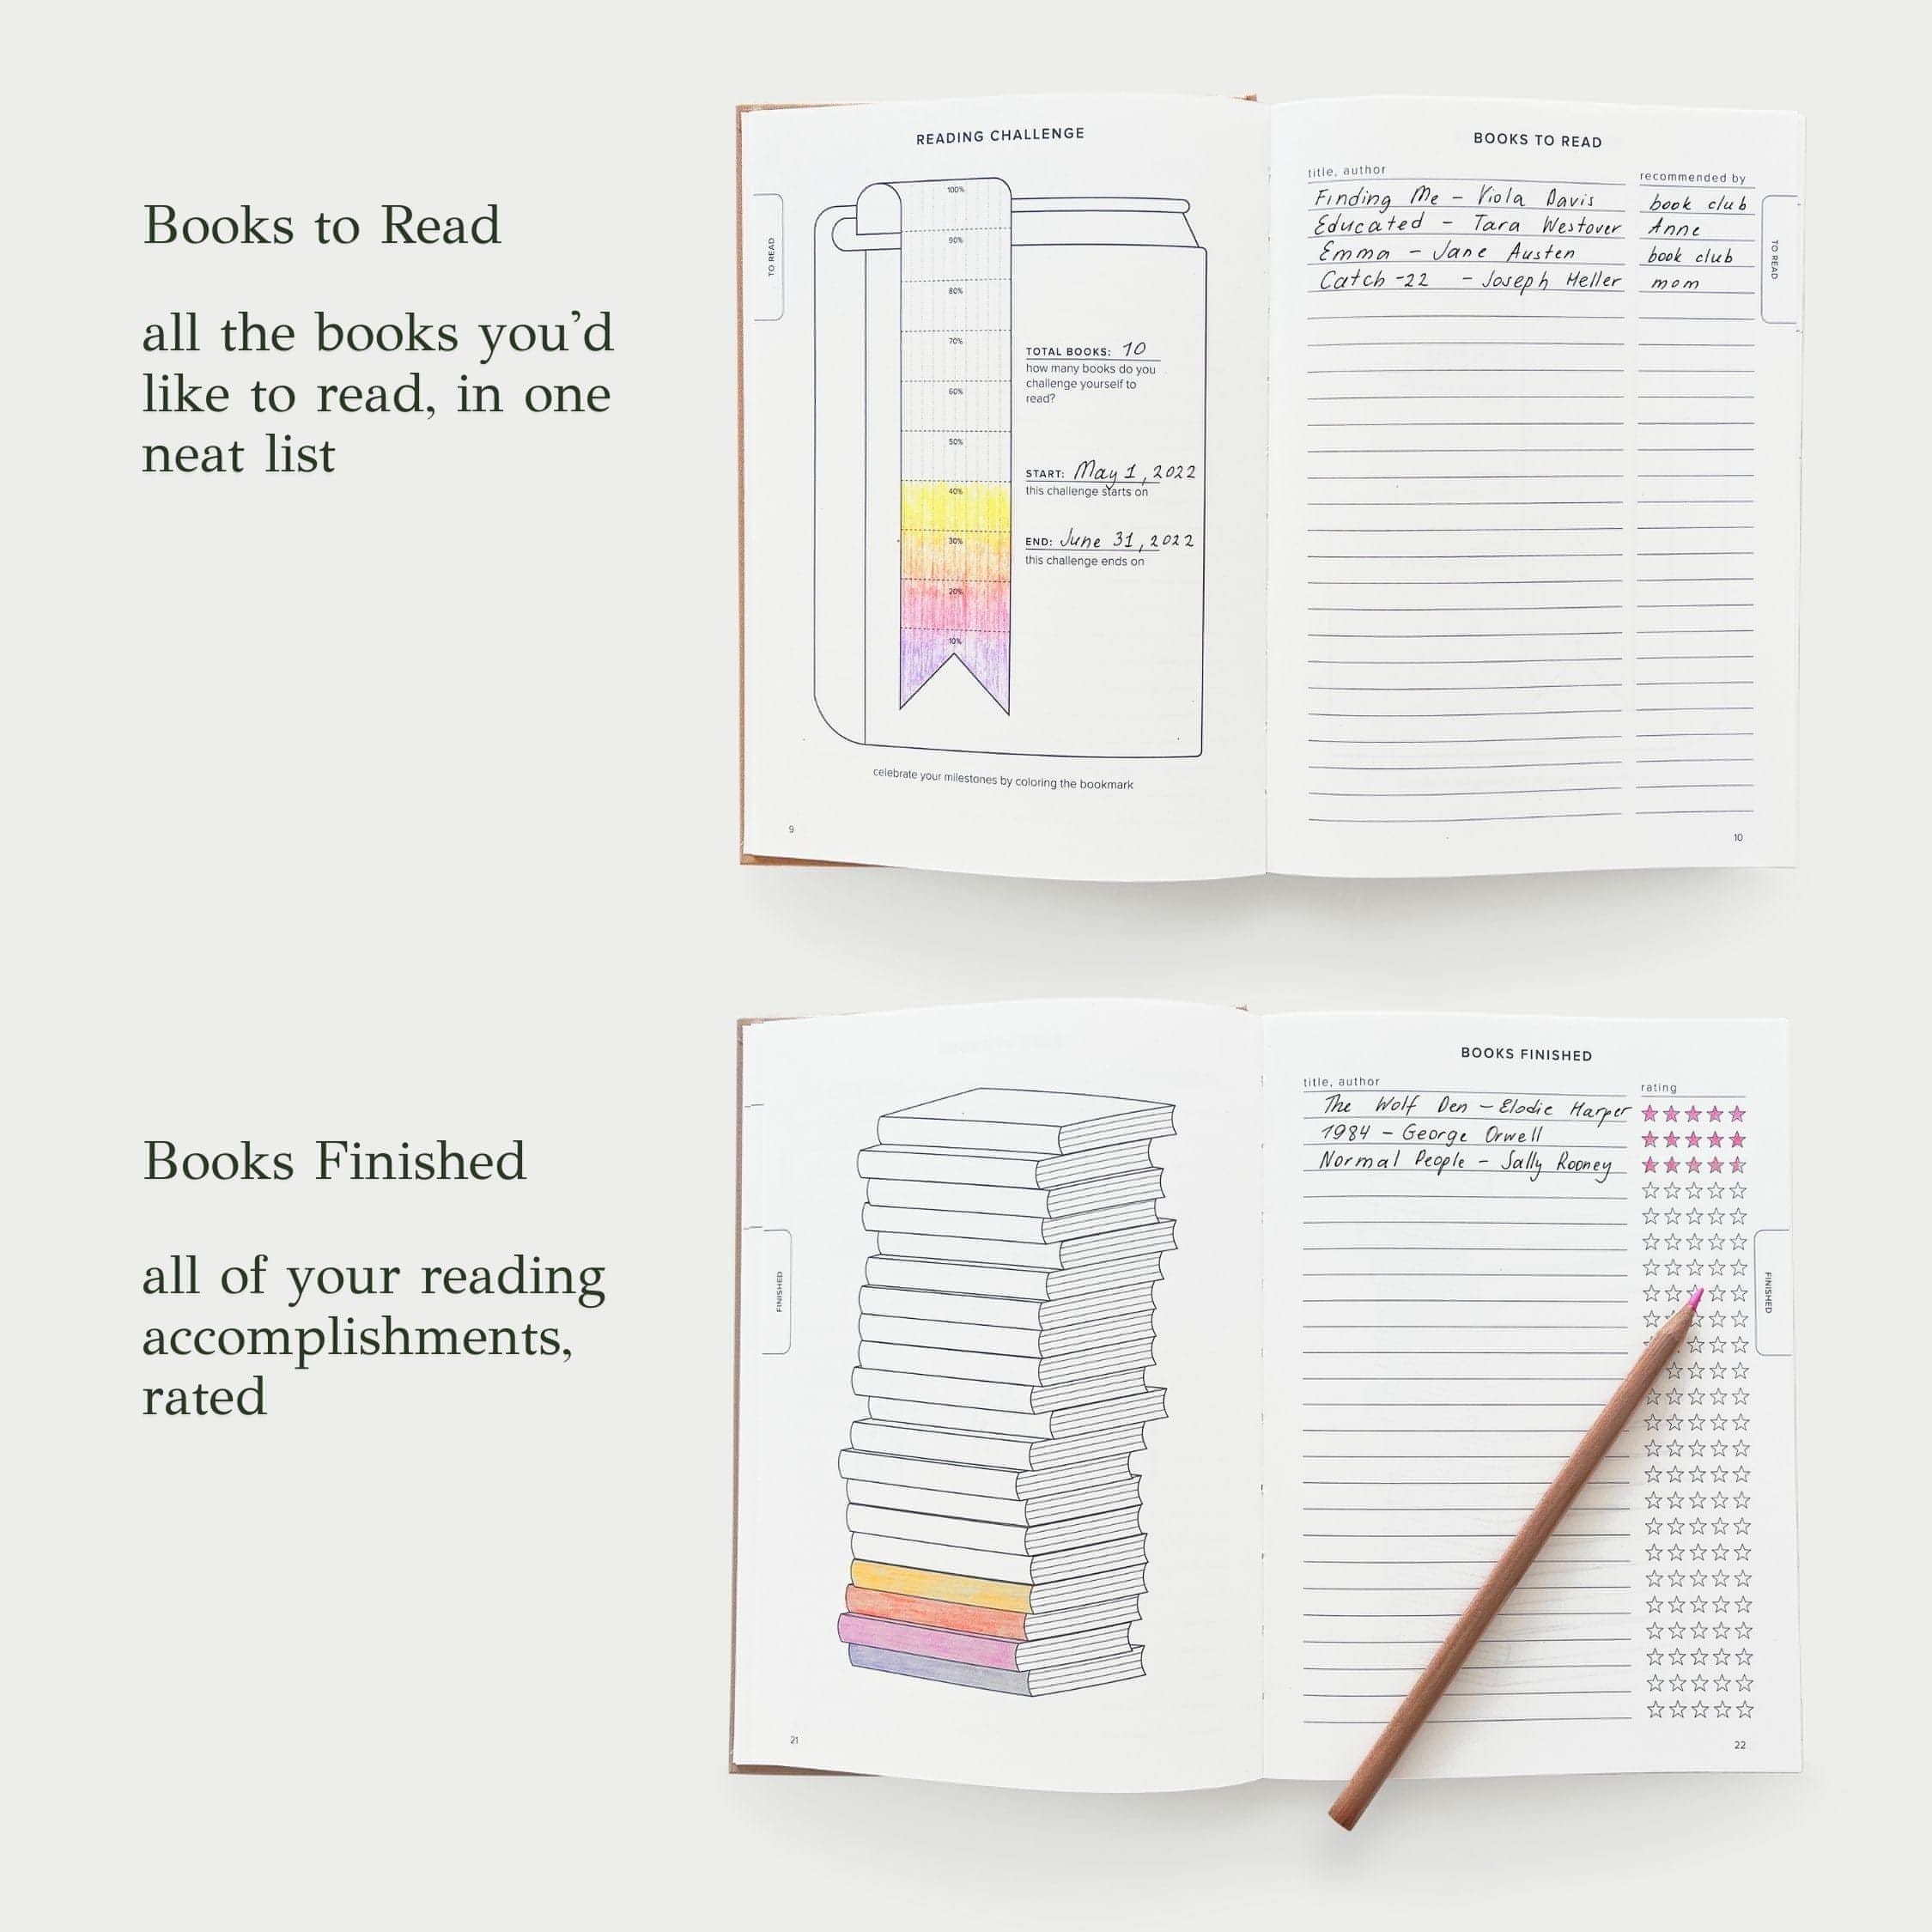 Book Rating Tracker Book Review Printable Book Review Worksheet Reading  Journal Reading Log Book Tracker Book Journal Book Reading Journal